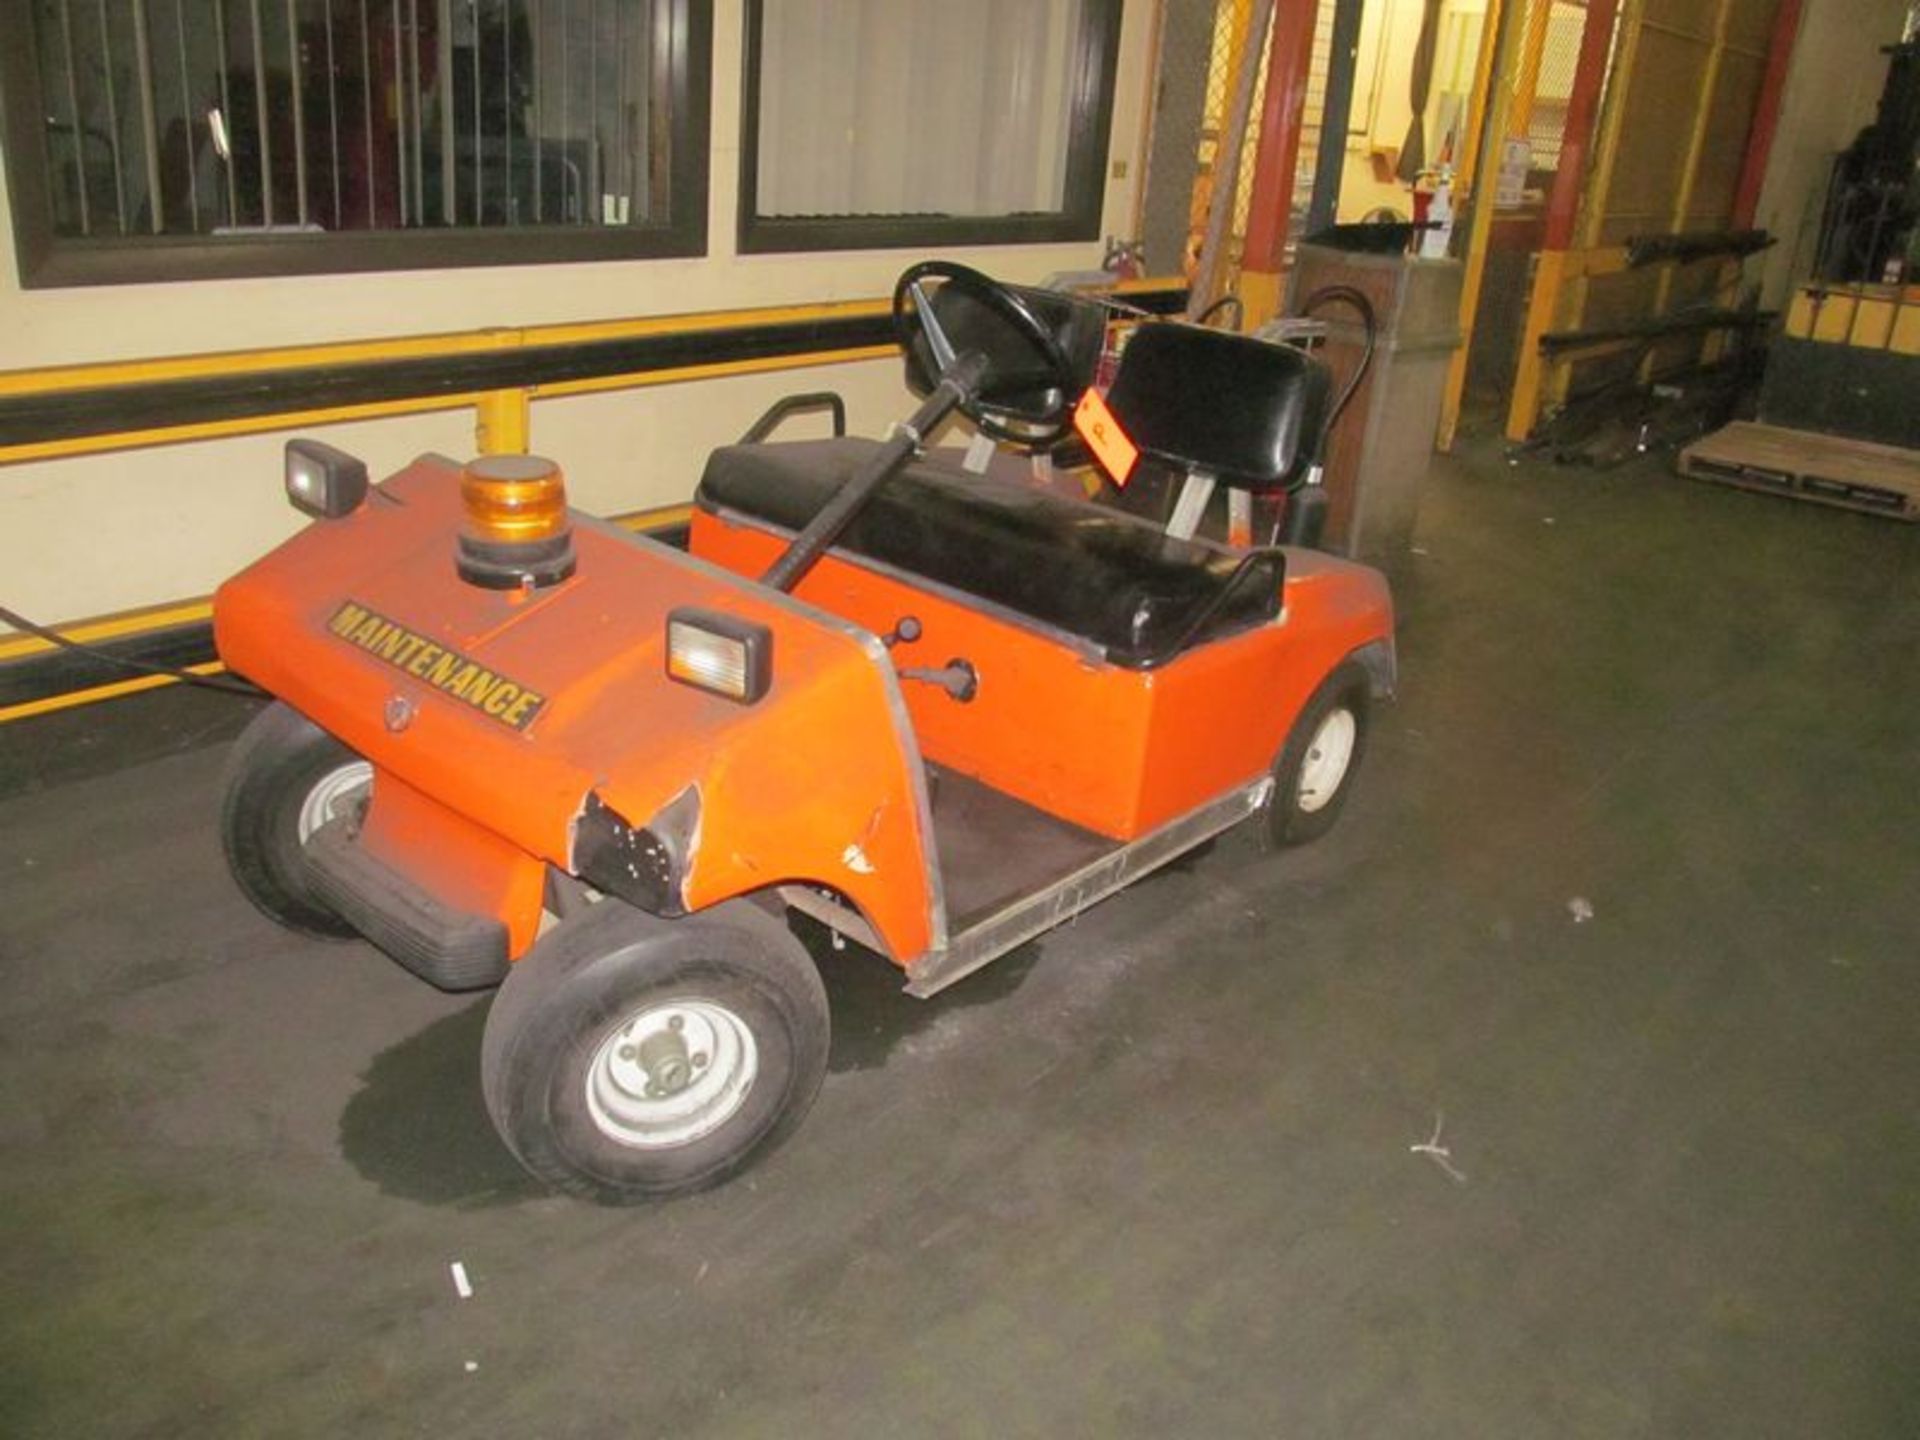 Electric golf cart-make unknown-with charger, and (2) fire extinguishers, (6) 12 volt batteries-